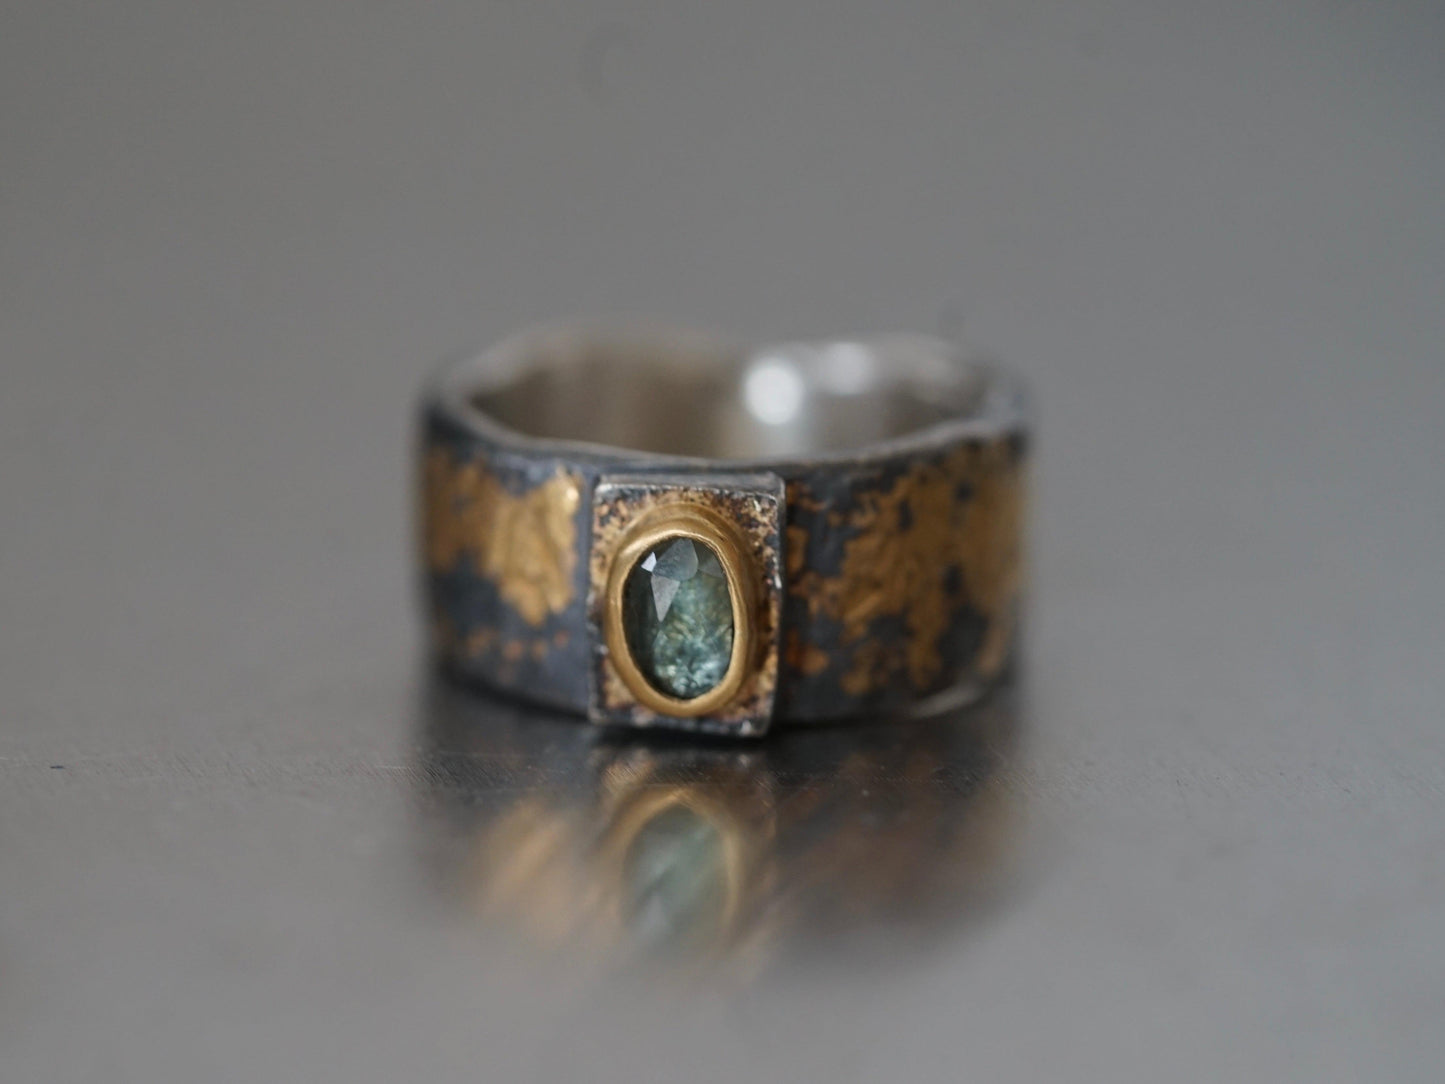 22k gold and teal sapphire ring, size 6.75